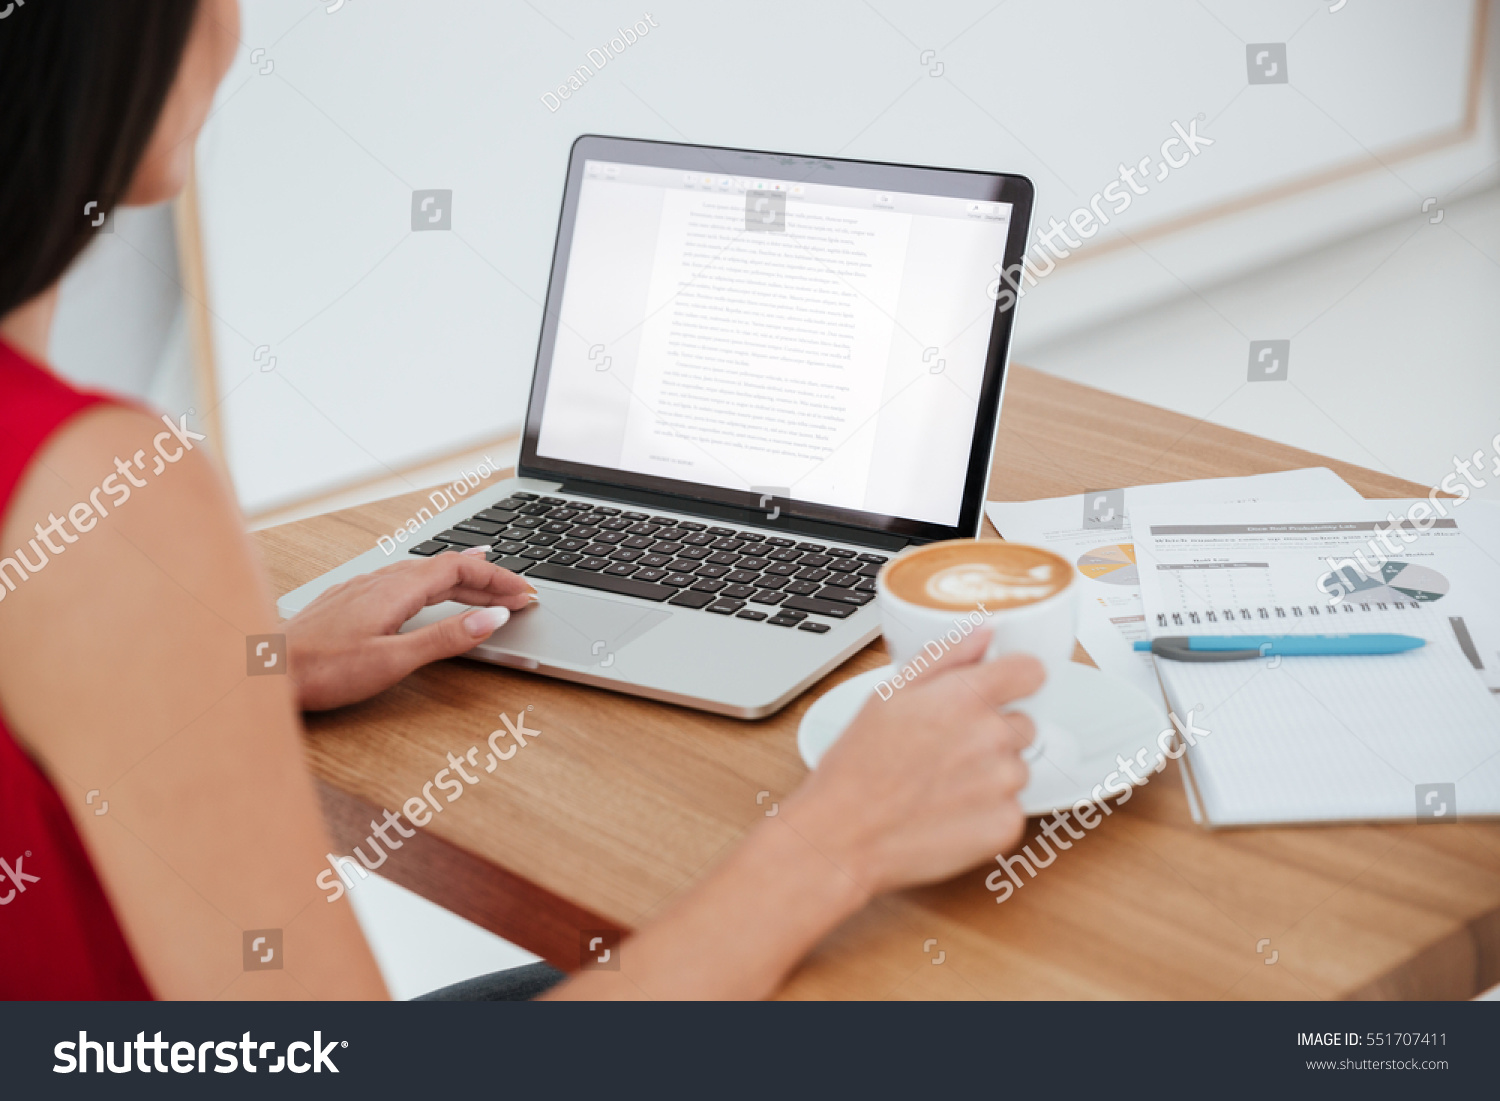 Back view of business woman in red shirt sitting on workplace with laptop, cup of coffee and documents #551707411